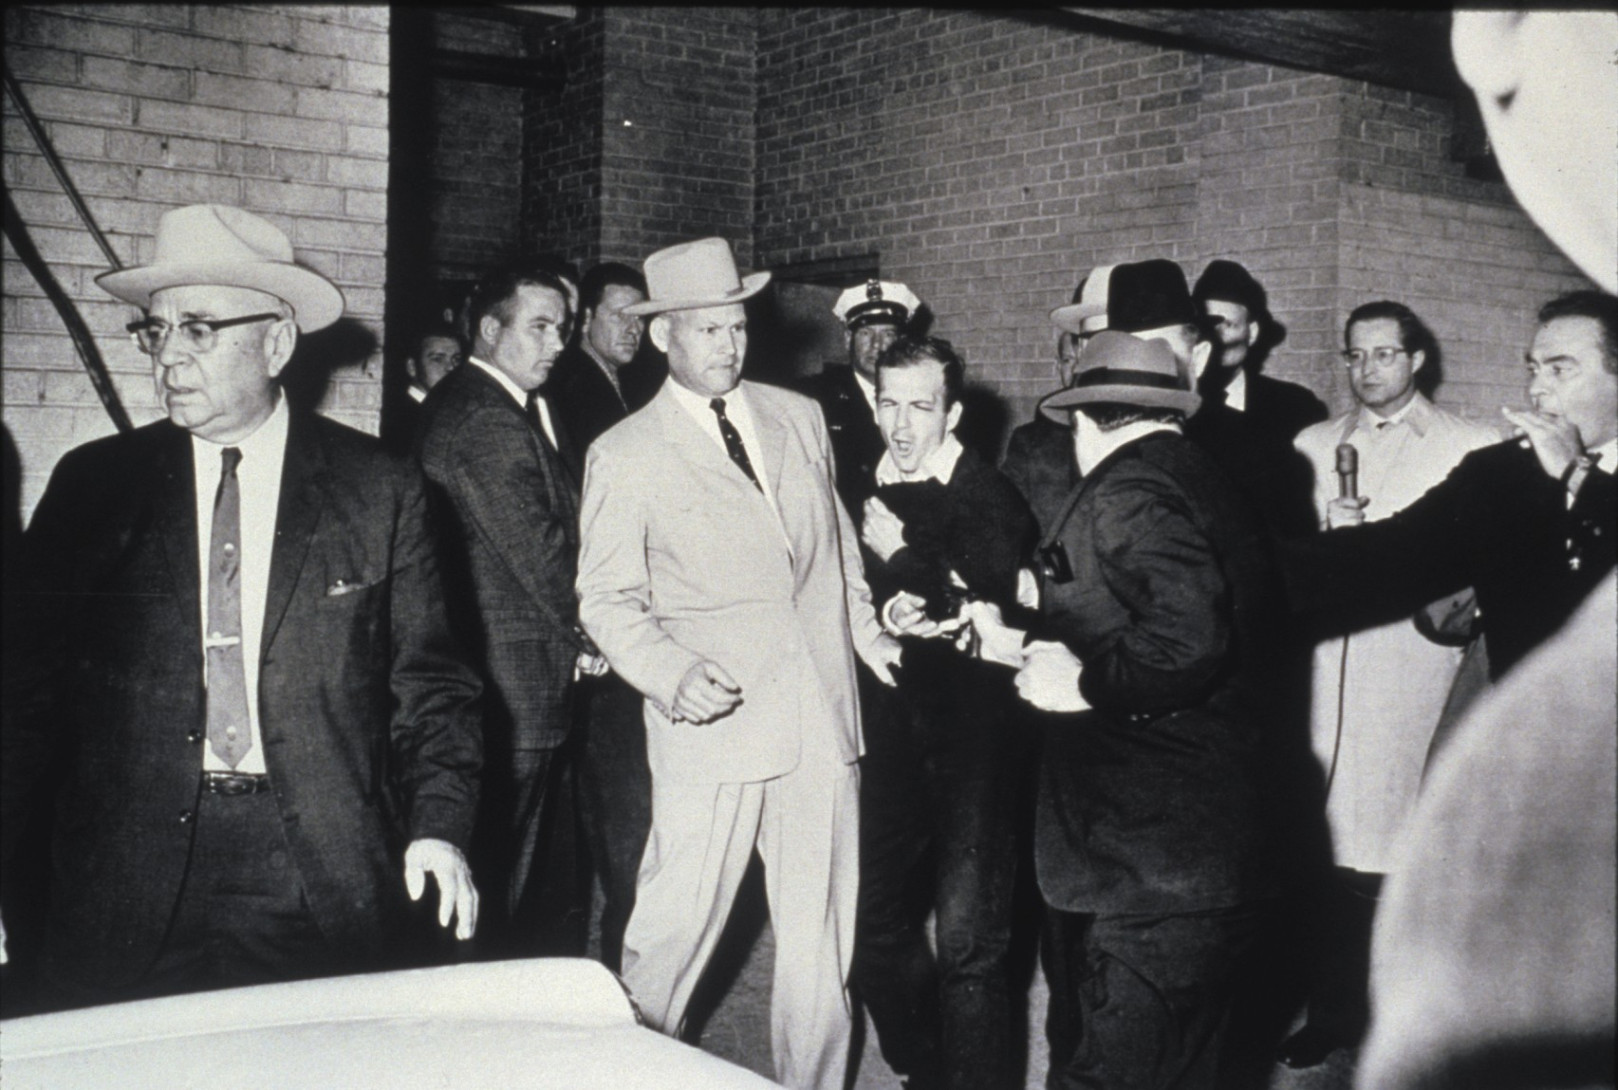 Robert H. Jackson for his photograph ‘Murder of Lee Oswald by Jack Ruby’